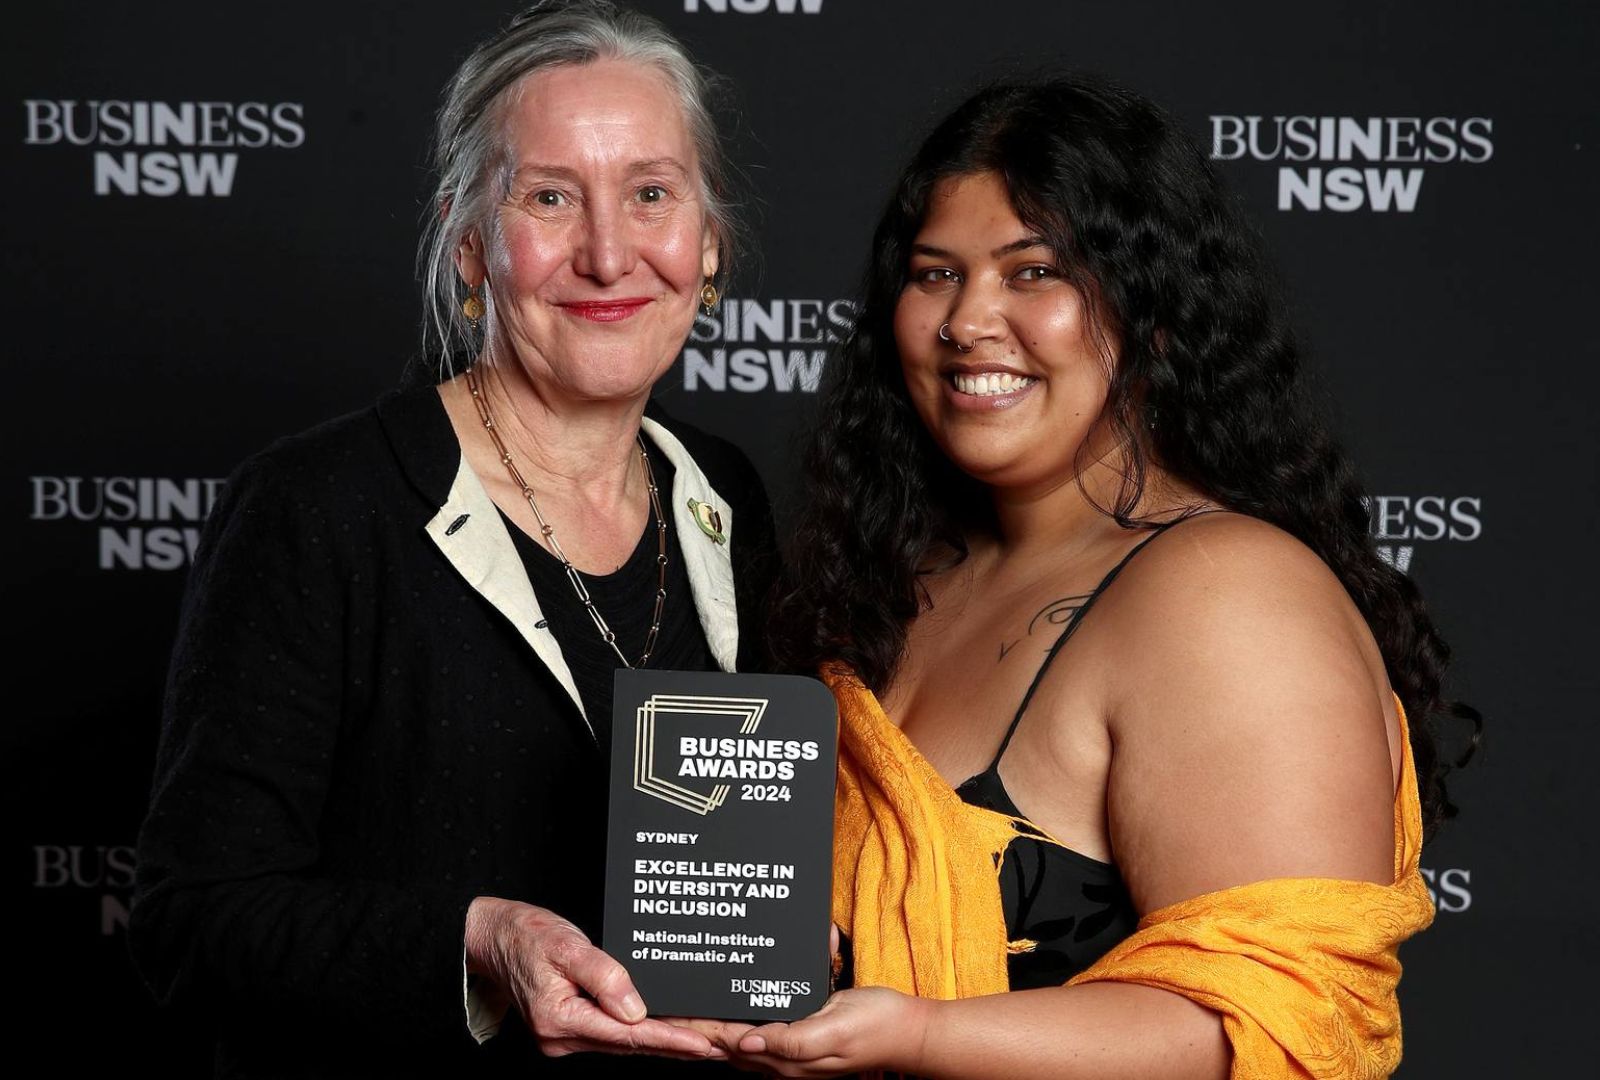 From left to right: Christina Alvarez and Andrea Daniels accepted the award for Excellence in Diversity and Inclusion on behalf of NIDA at the Business Awards 2024.